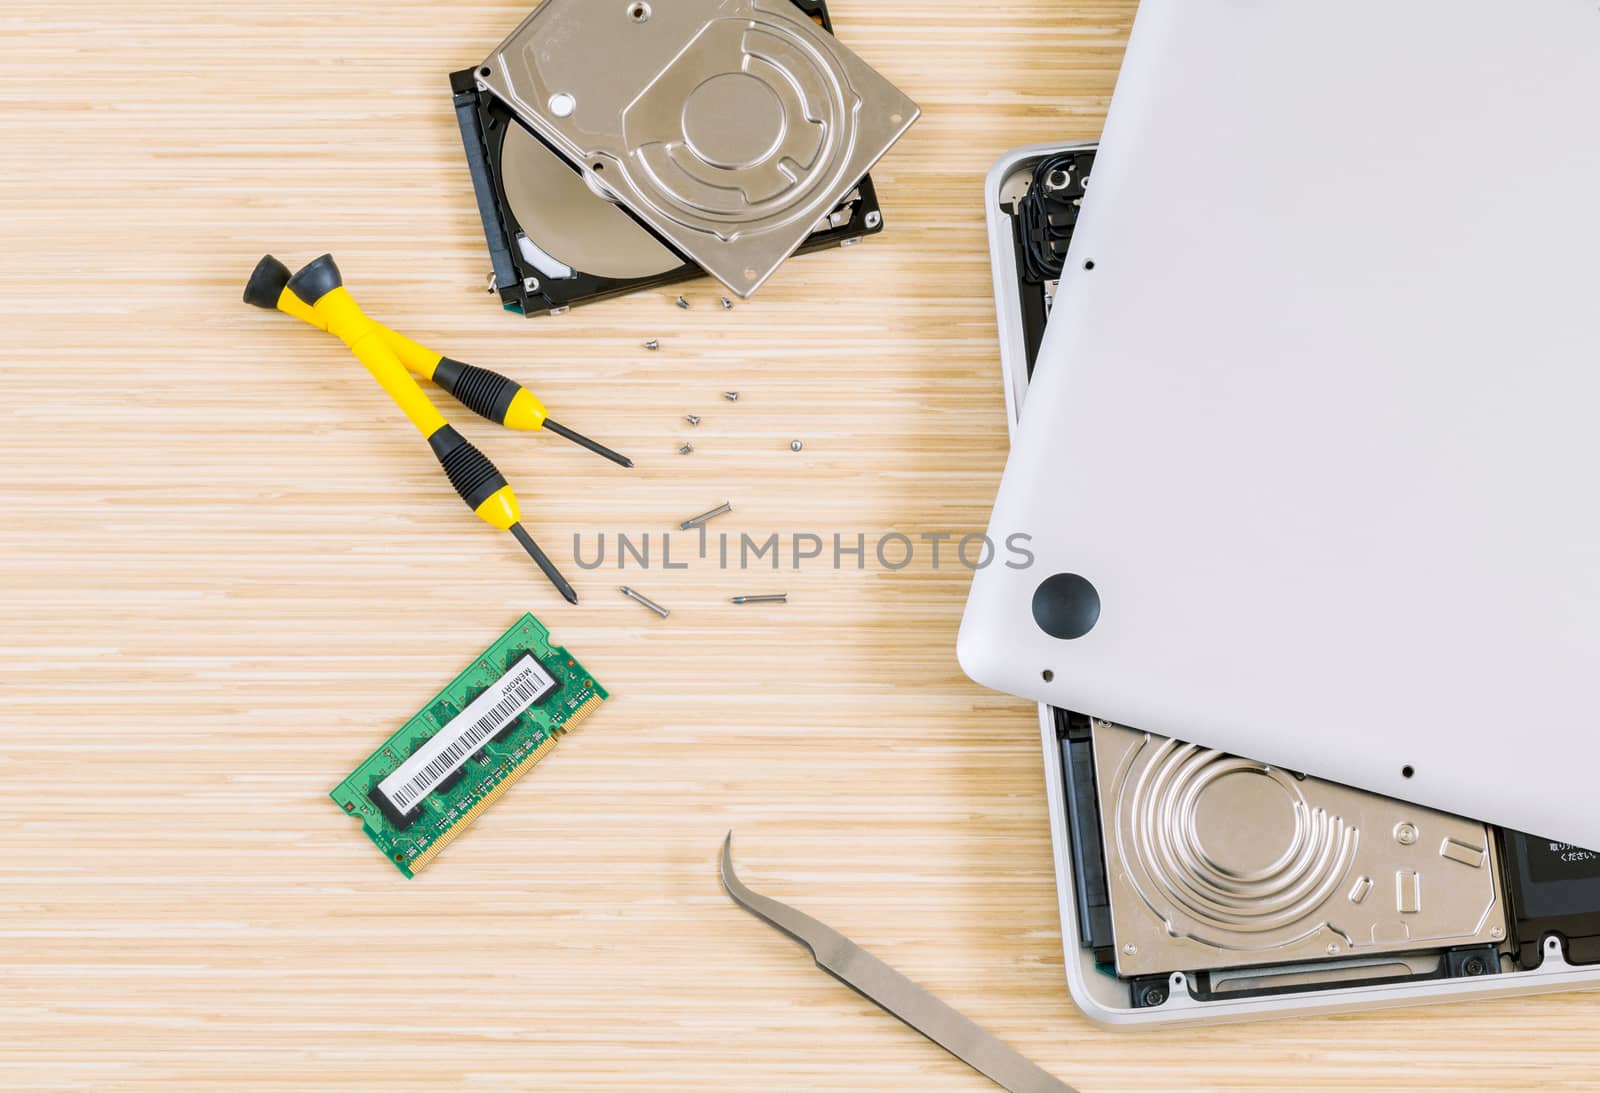 Technician support upgrade part and fixing laptop.